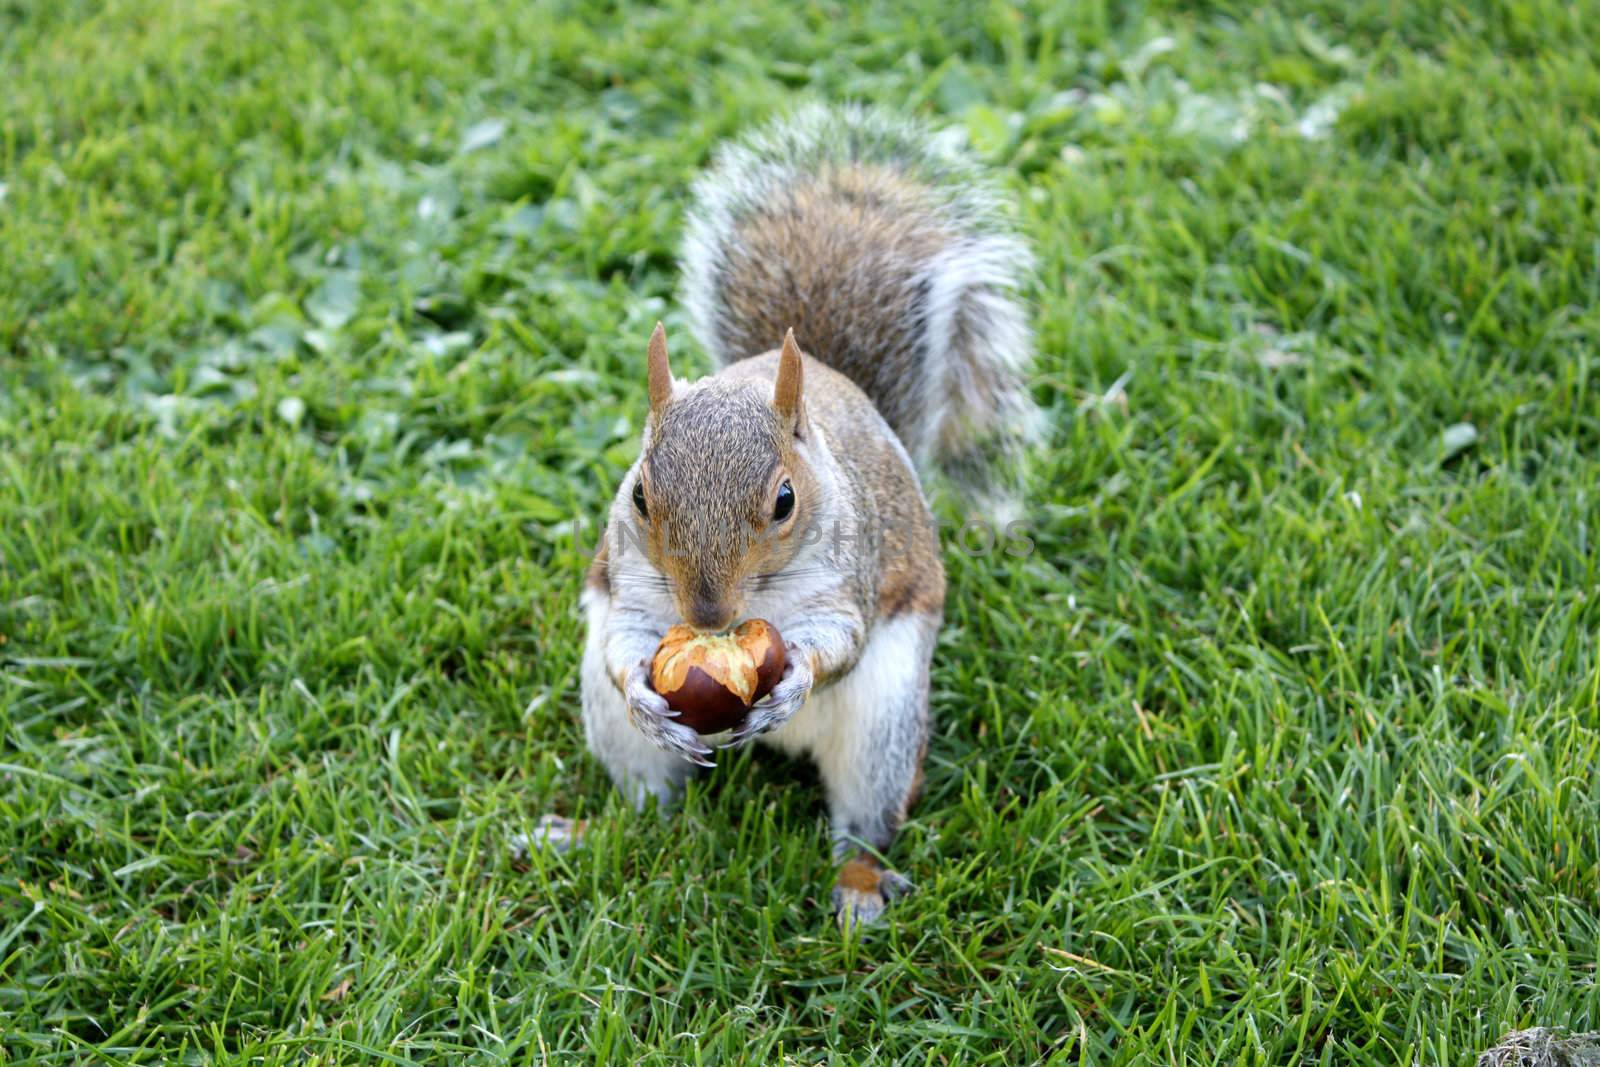 A squirrel eating a nut